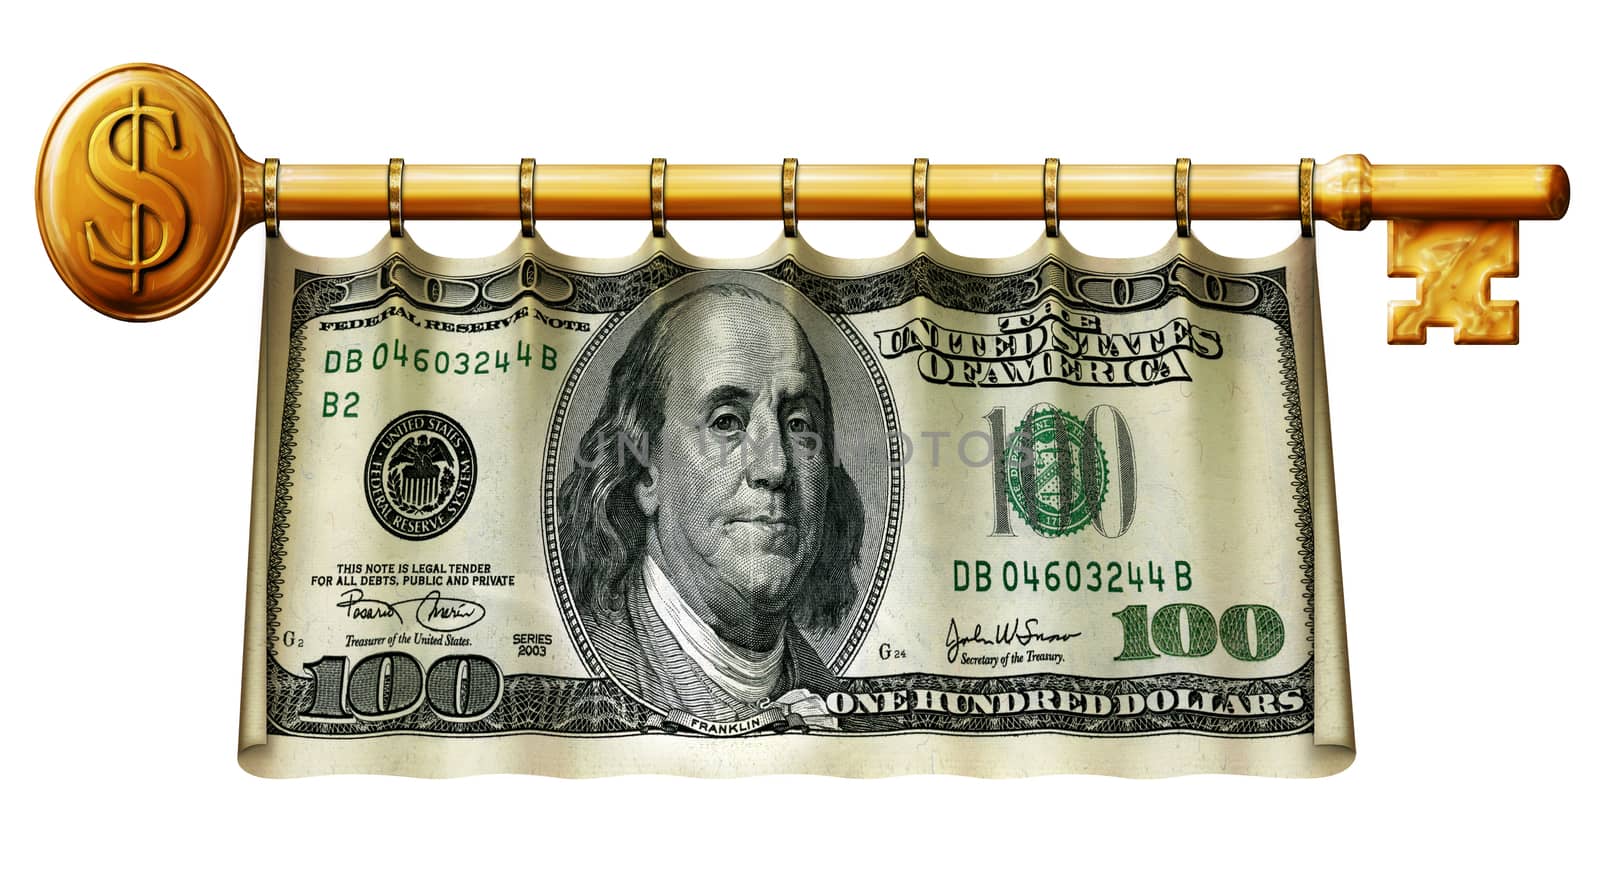 Photo Illustration of a 50 dollar bill retouched and re-illustrated as a banner hanging on a gold key.